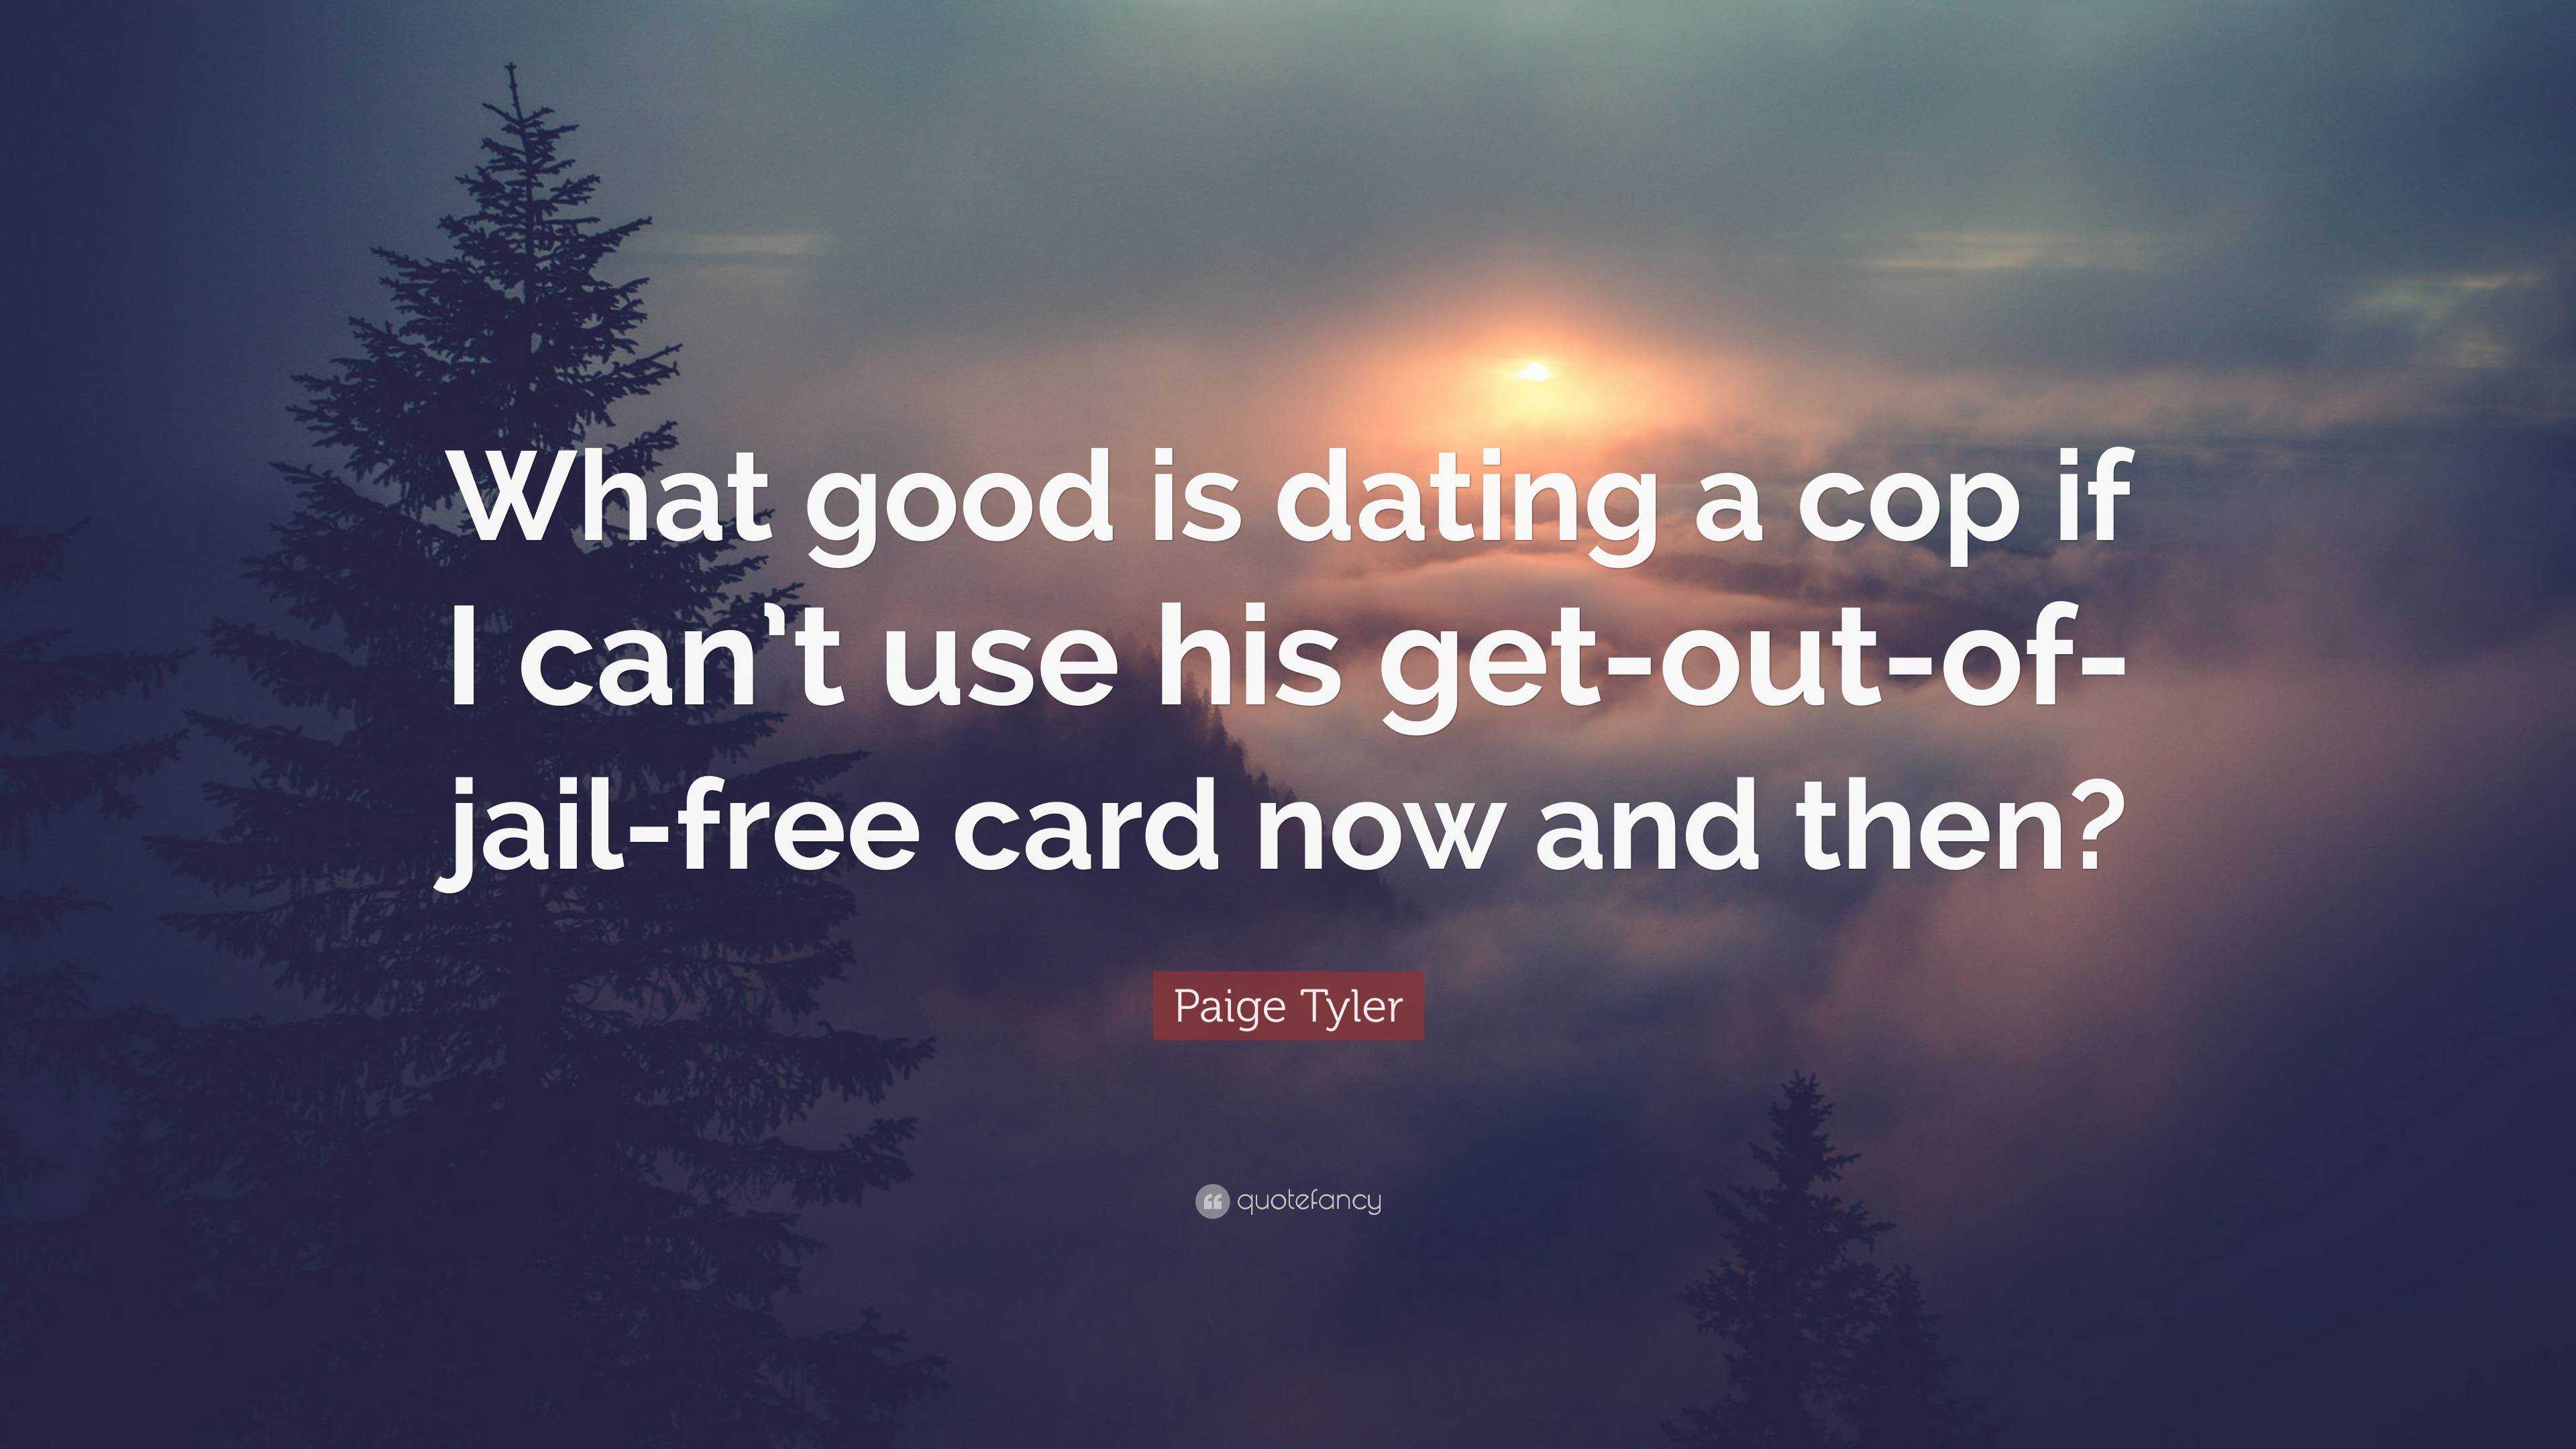 dating Reviewed: What Can One Learn From Other's Mistakes